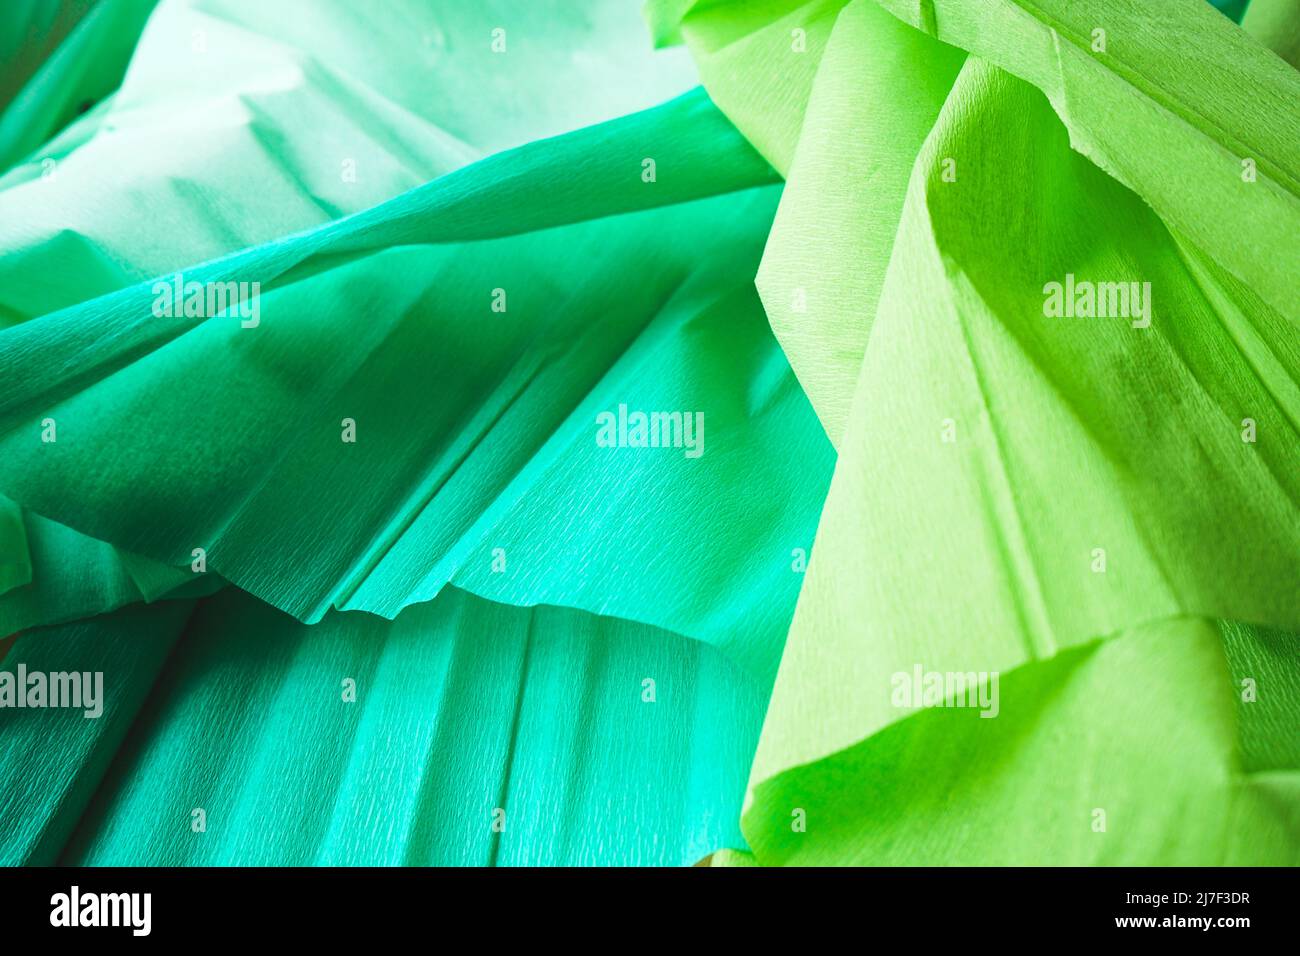 Green textured image of crepe paper in green tones Stock Photo